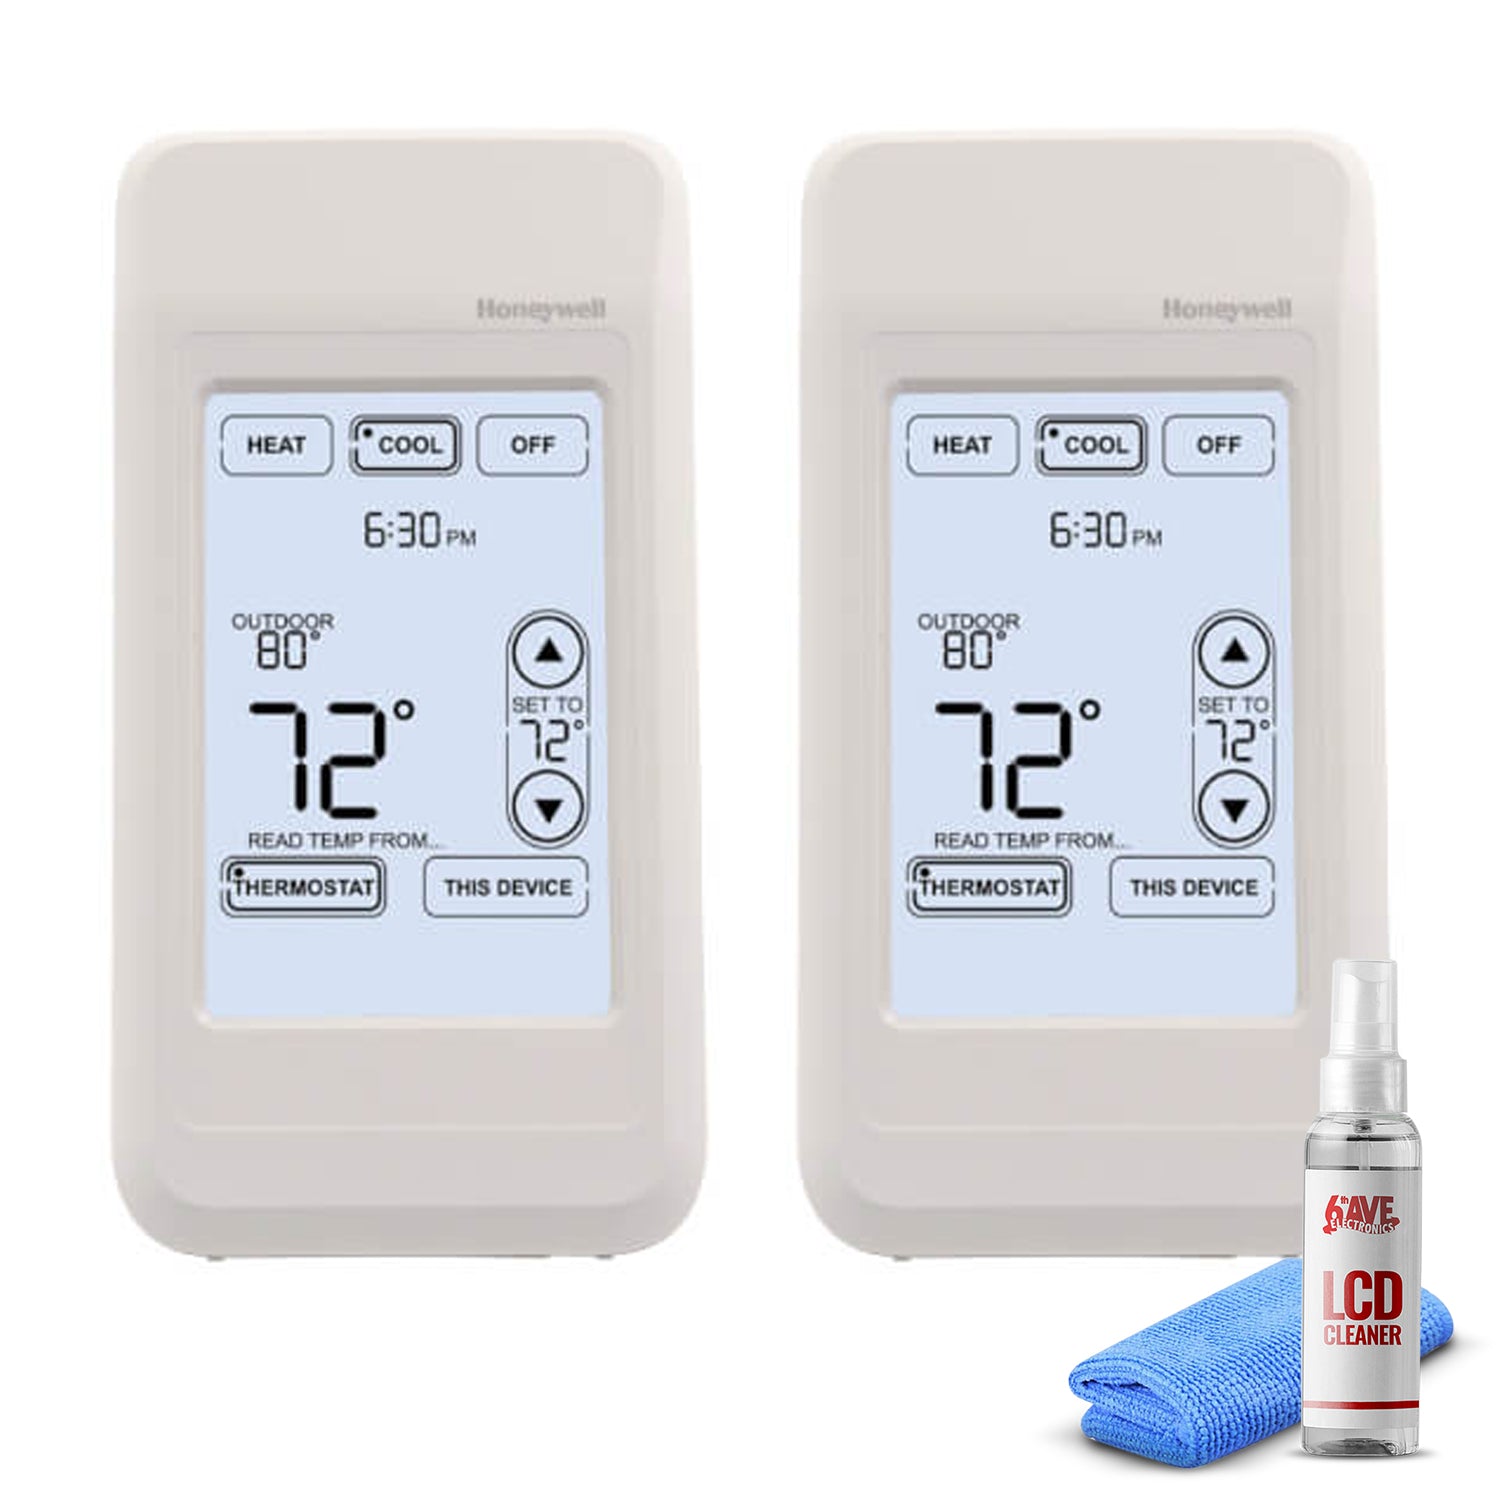 2-Pack Honeywell REM5000R1001 Portable Comfort Control + LCD Cleaner